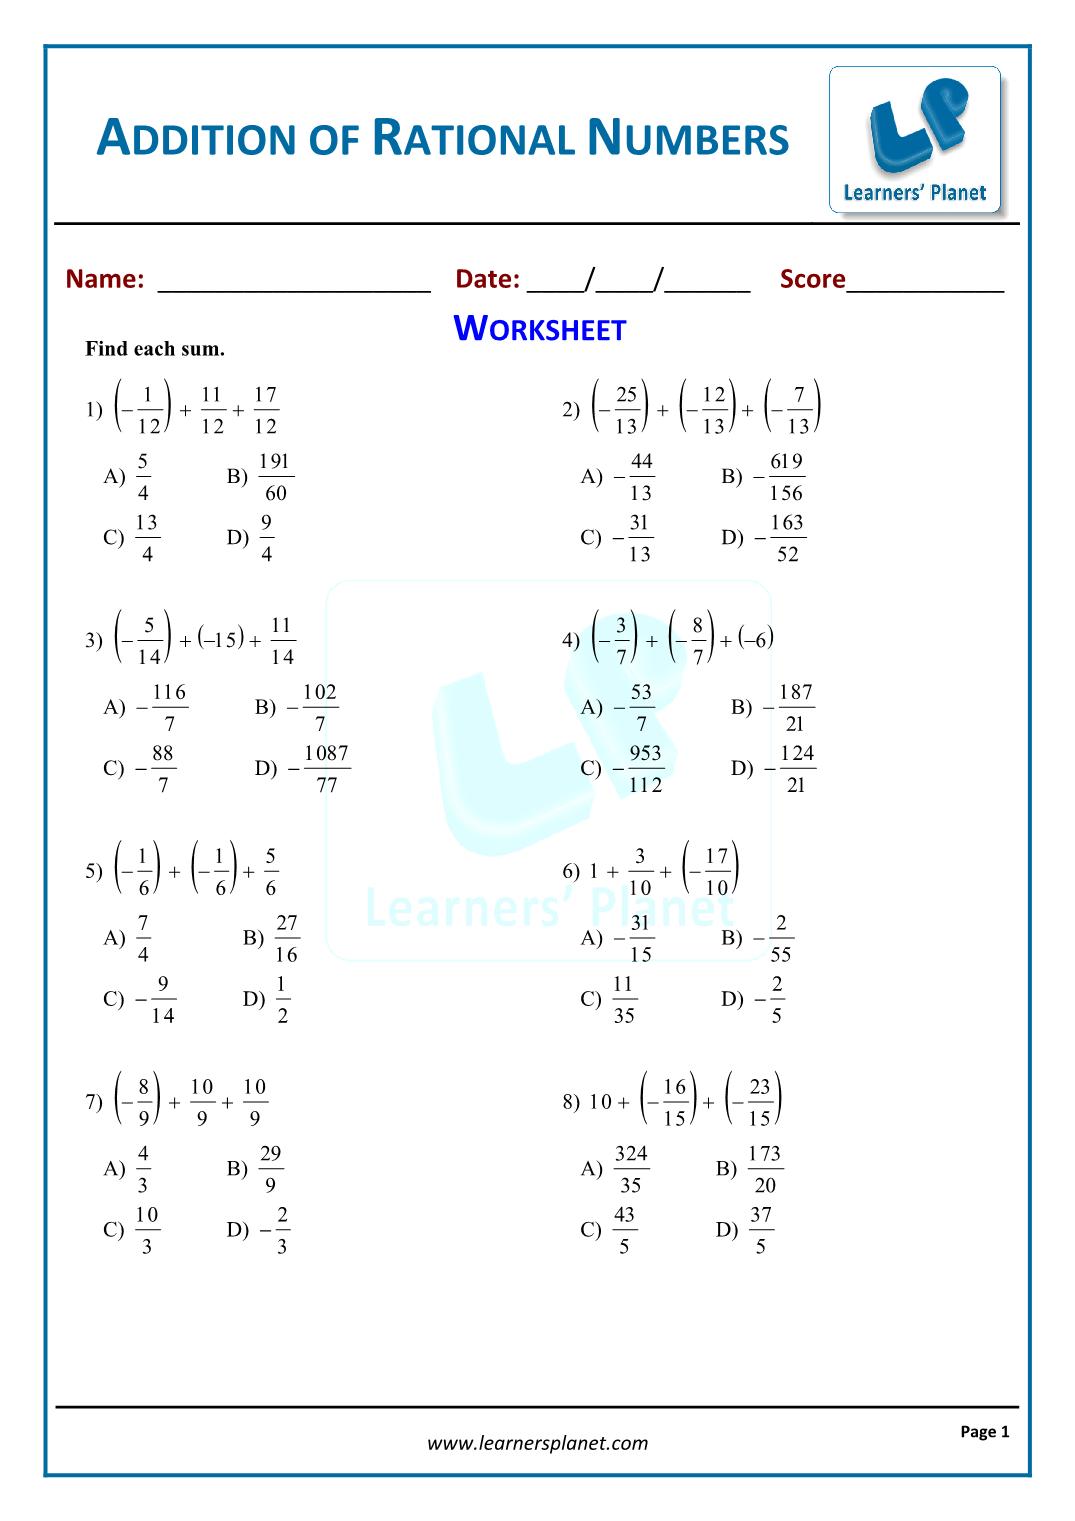 addition-of-rational-numbers-workbook-1